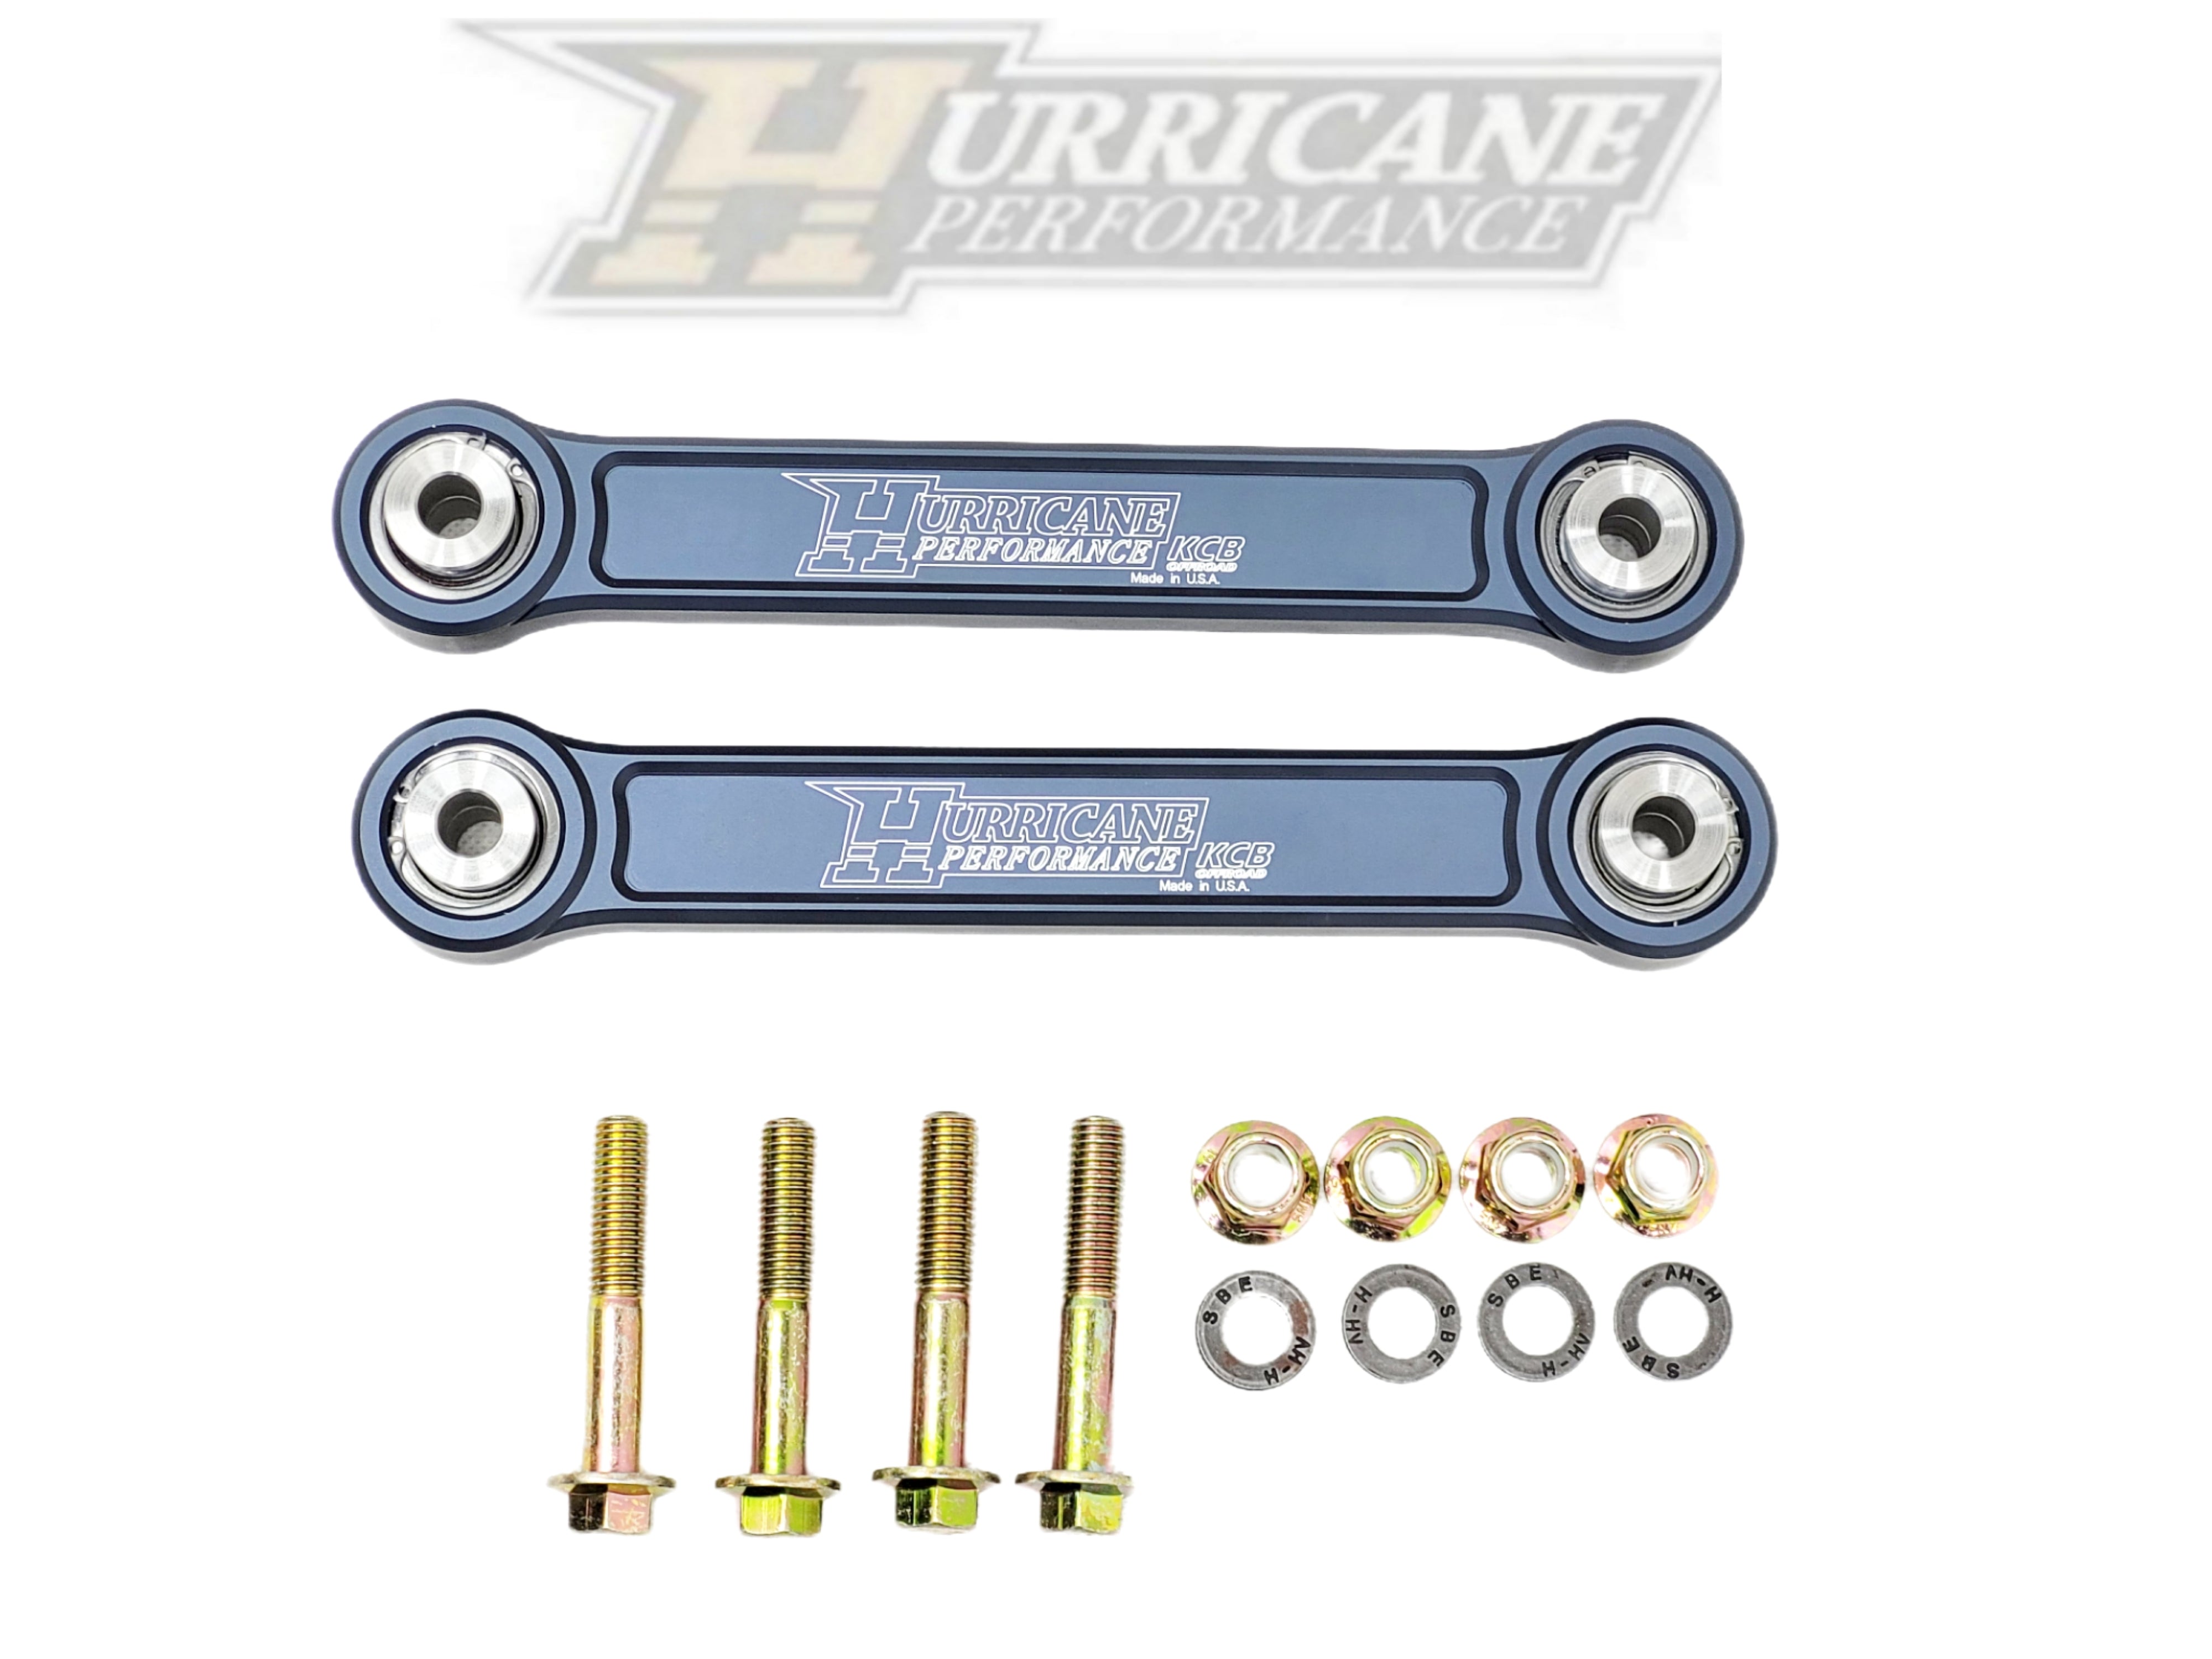 Hurricane Performance Forged Aluminium Front Sway Bar End Link with Heim Joints for Jeep Wrangler JL/JK